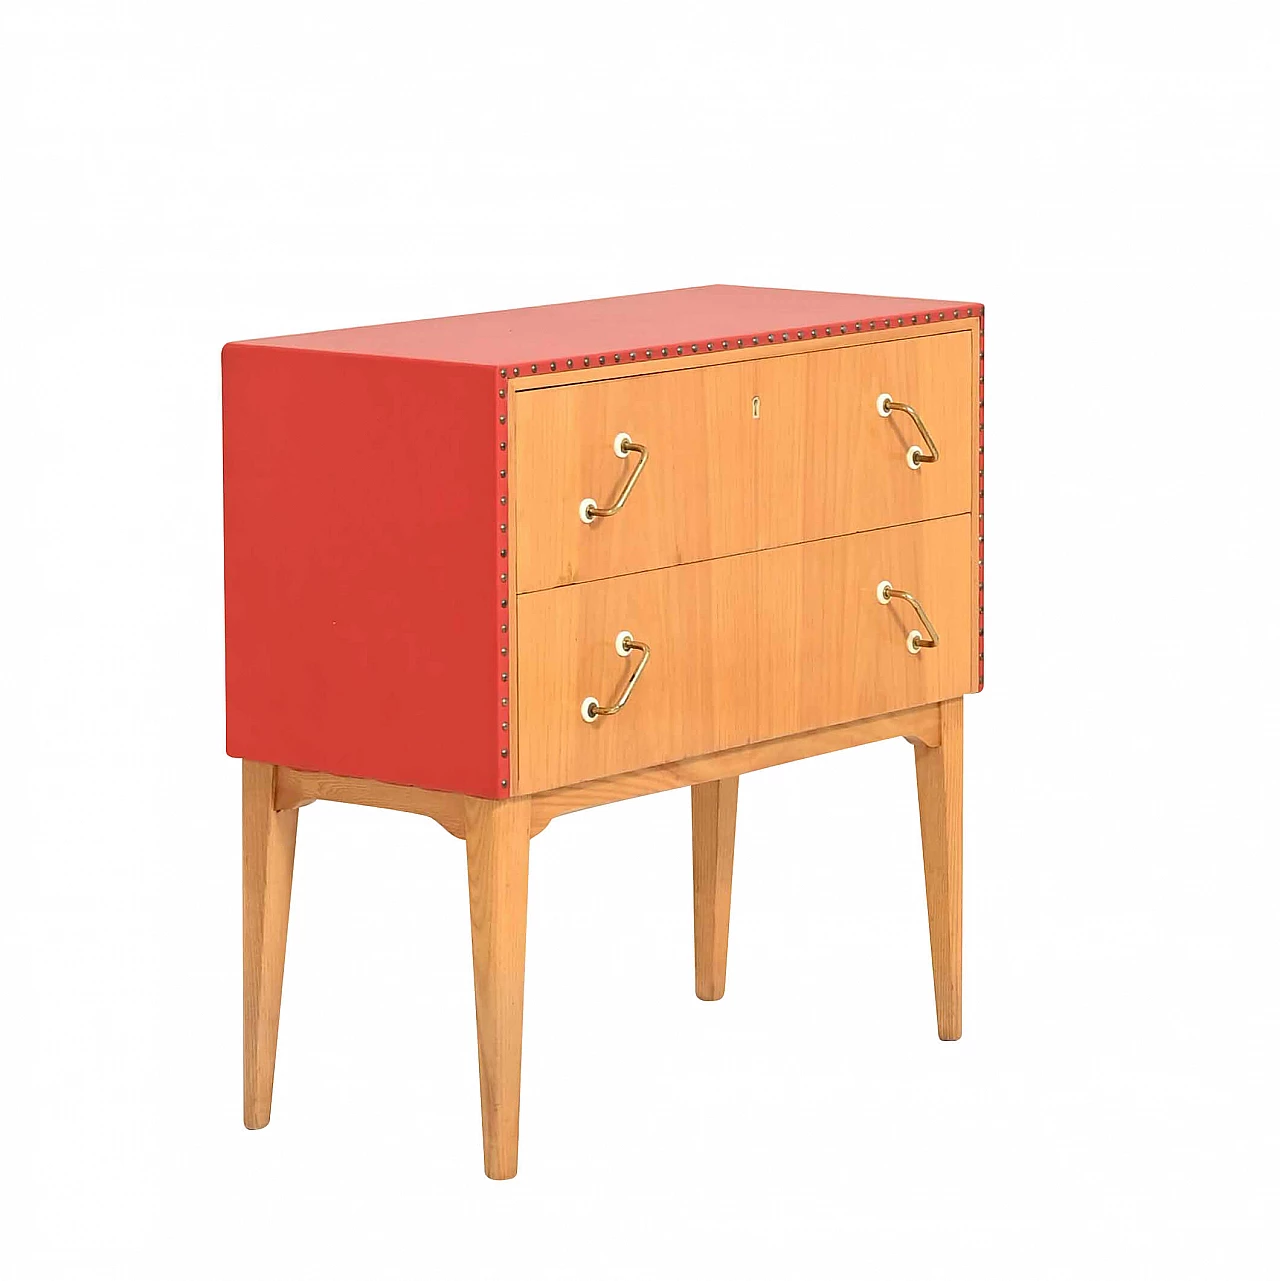 Entrance drawers in wood and red leather, 1960s 1235498